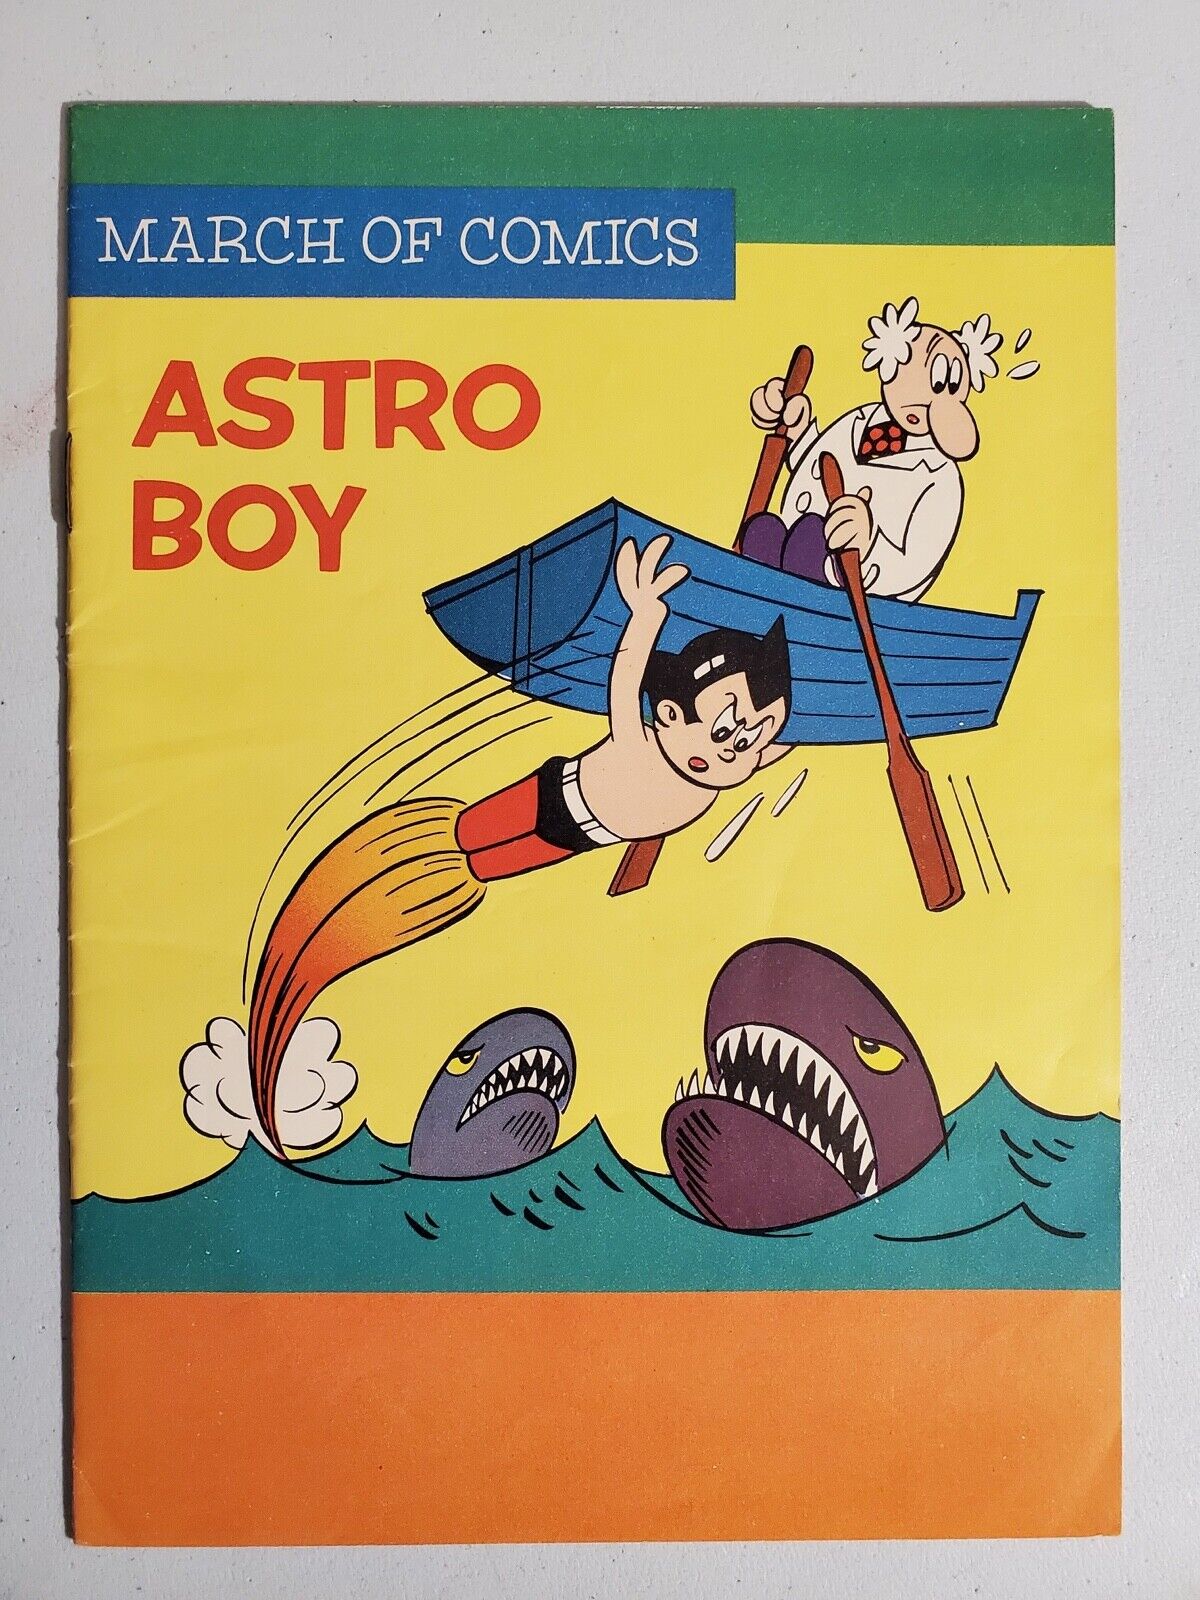 MARCH OF COMICS 285 2nd ASTRO BOY RARE GIVEAWAY PROMO 1966 PROMOTIONAL VFNM